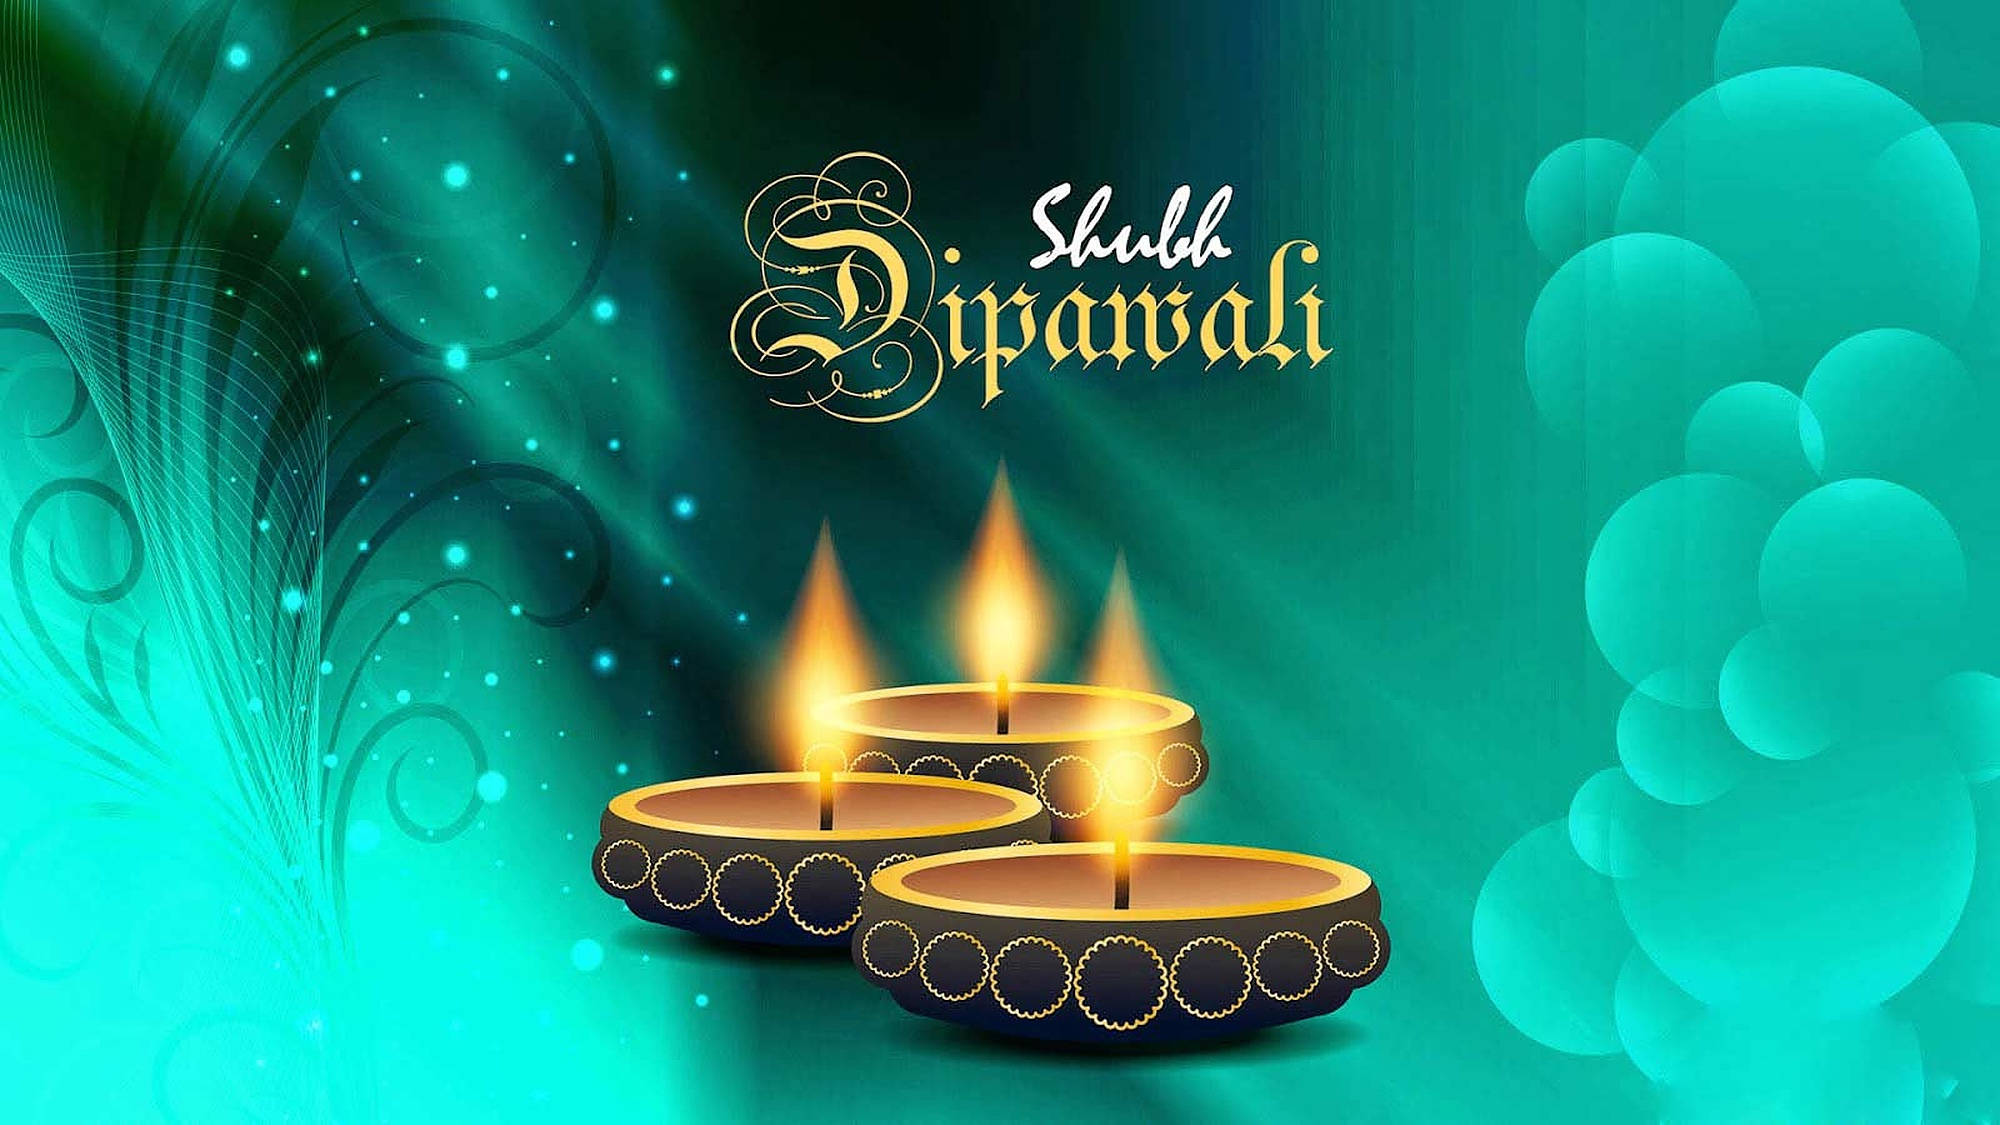 Dazzling Diwali Poster Features Glowing Diyas In The Center With The Words 